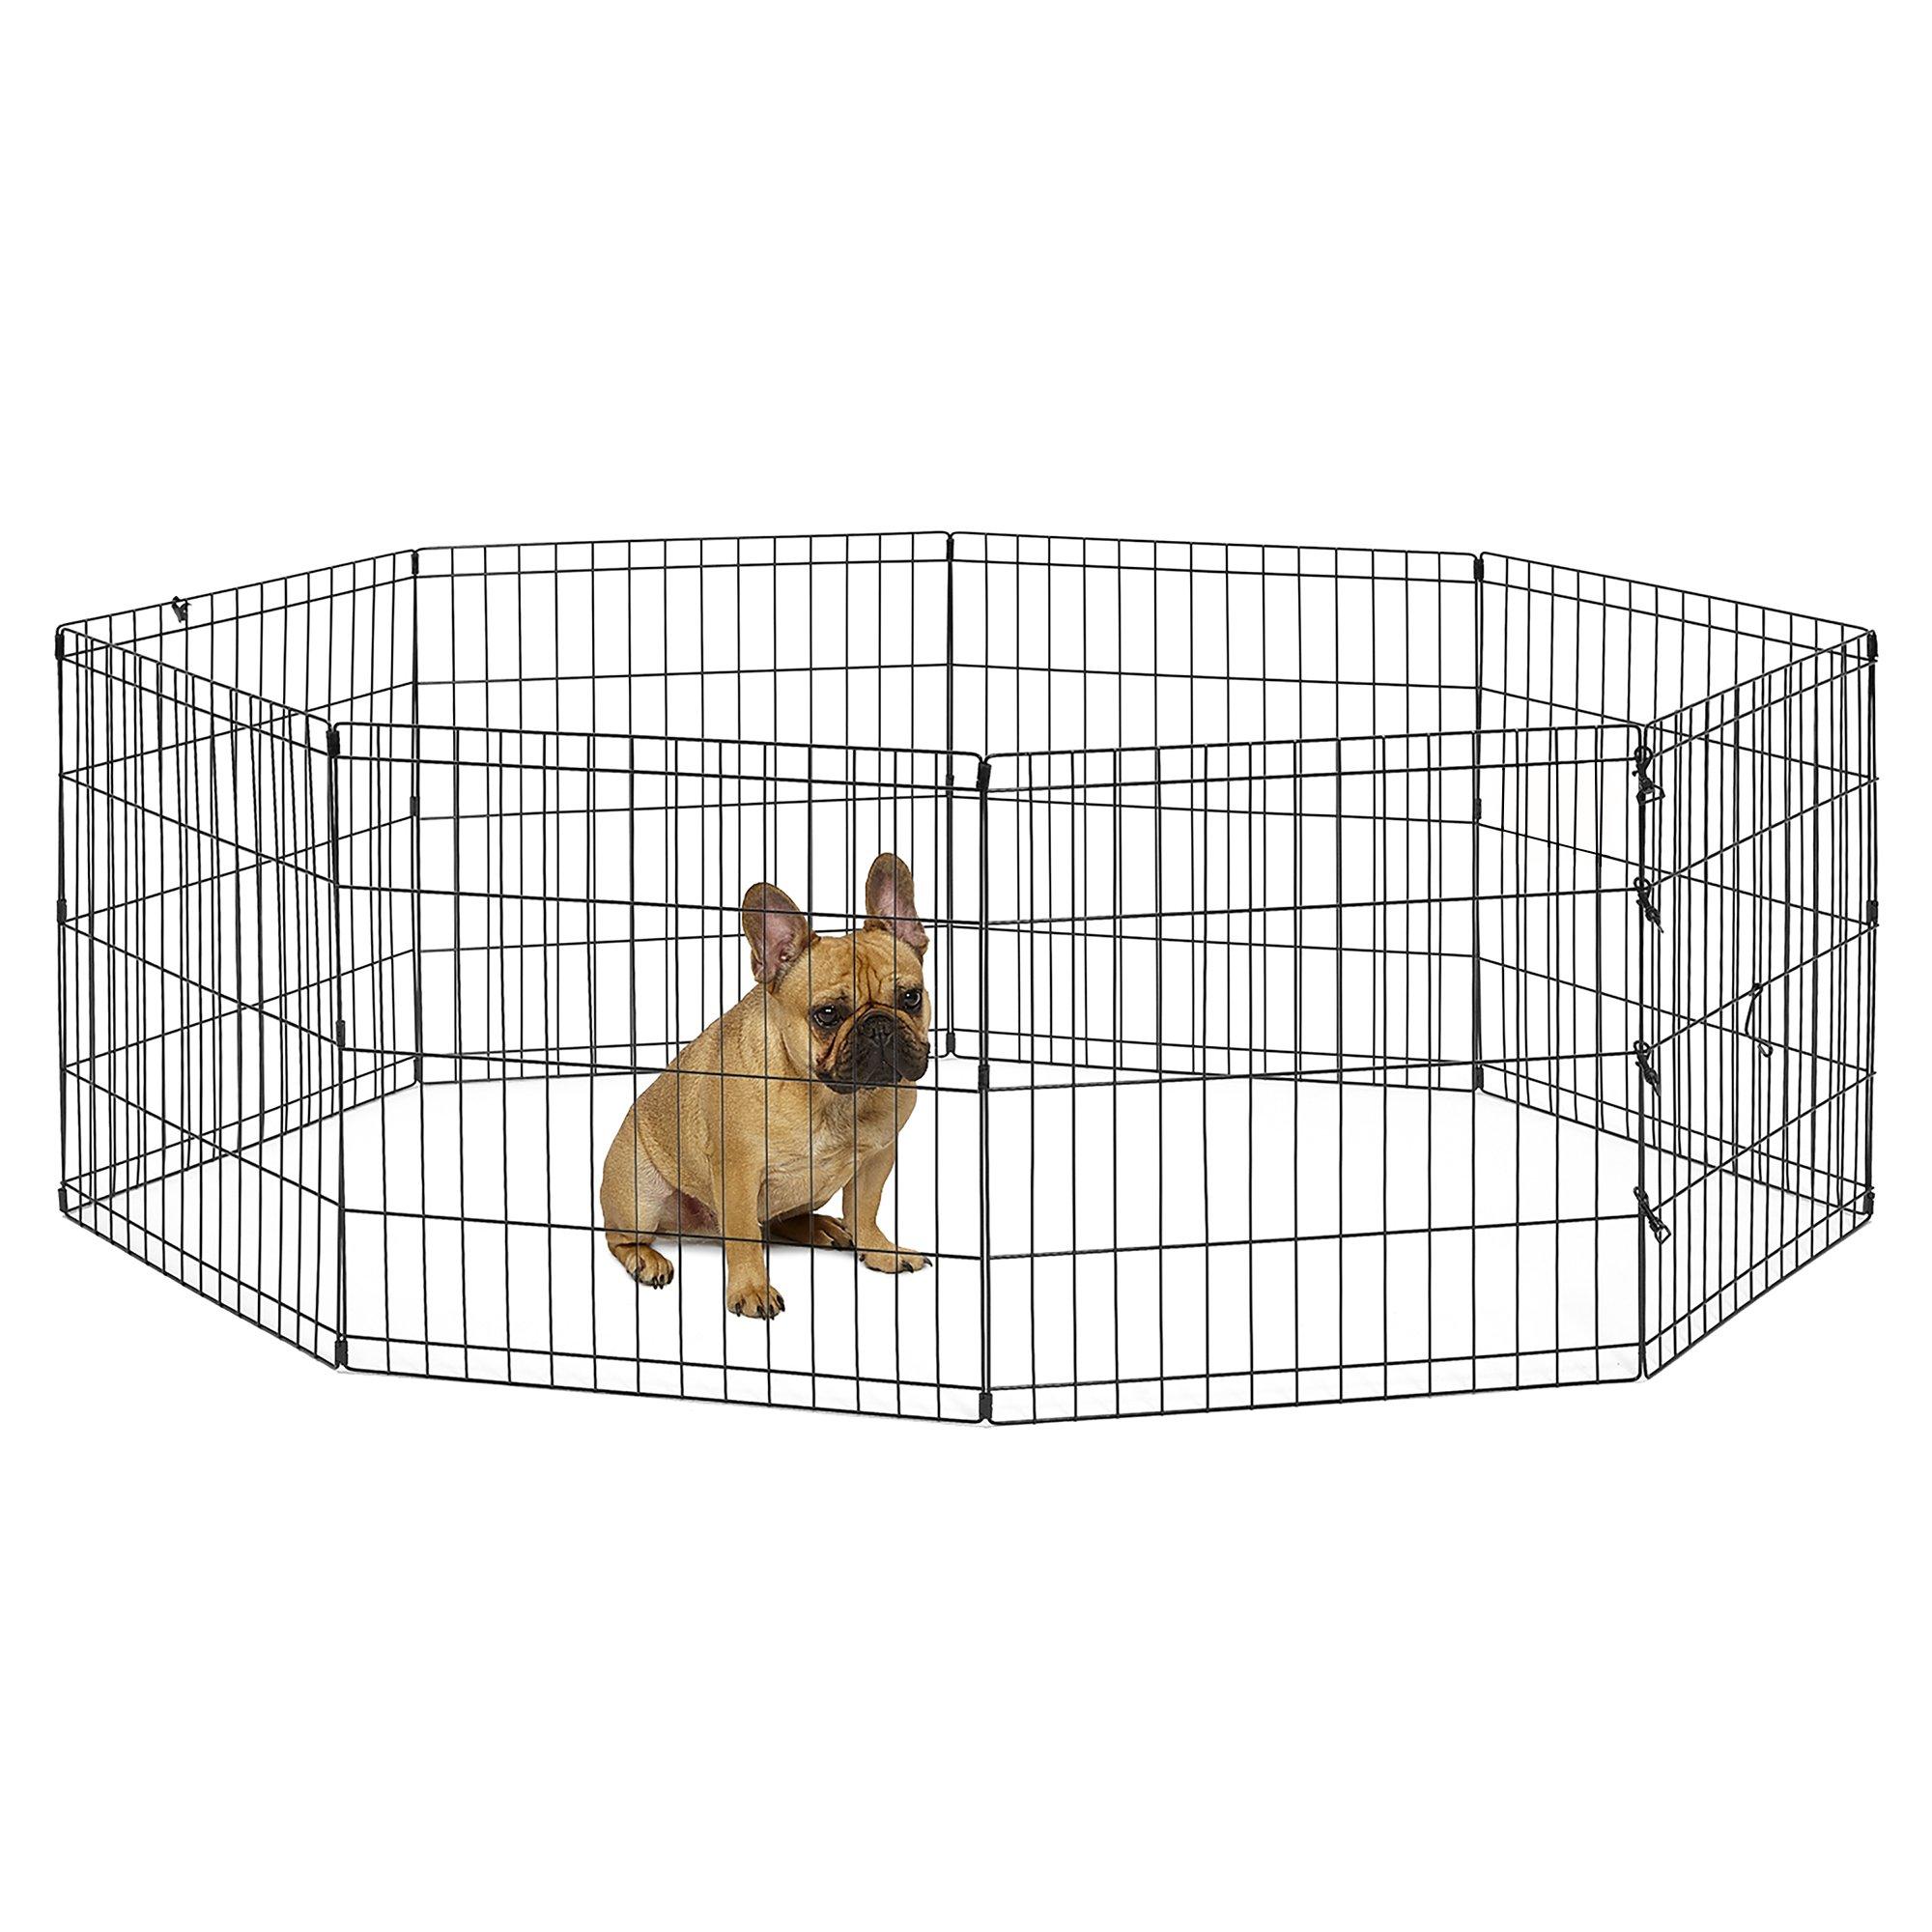 New World Pet Products B550-24 Foldable Exercise Pet Playpen, Black, Small/24 Inch x 24 Inch